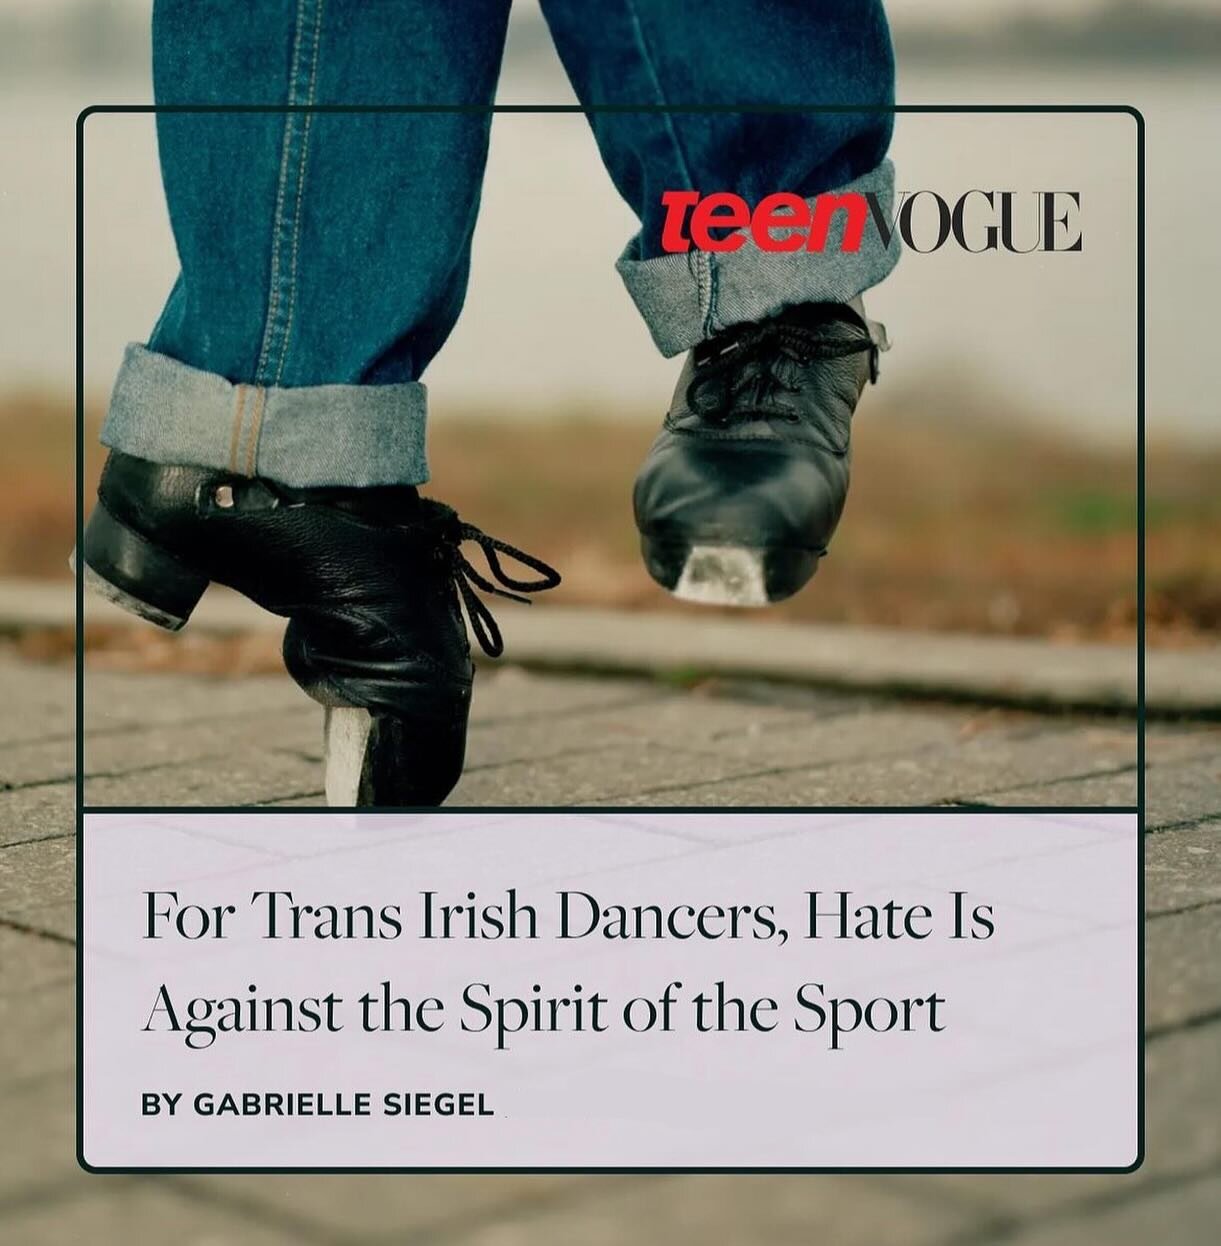 This St. Patrick&rsquo;s day, We could not be prouder of ODA&rsquo;s own @kjcampbellx , who was featured alongside this past week in Teen Vogue and in The New York Times discussing their experience as a trans Irish dancer in the world of competitive 